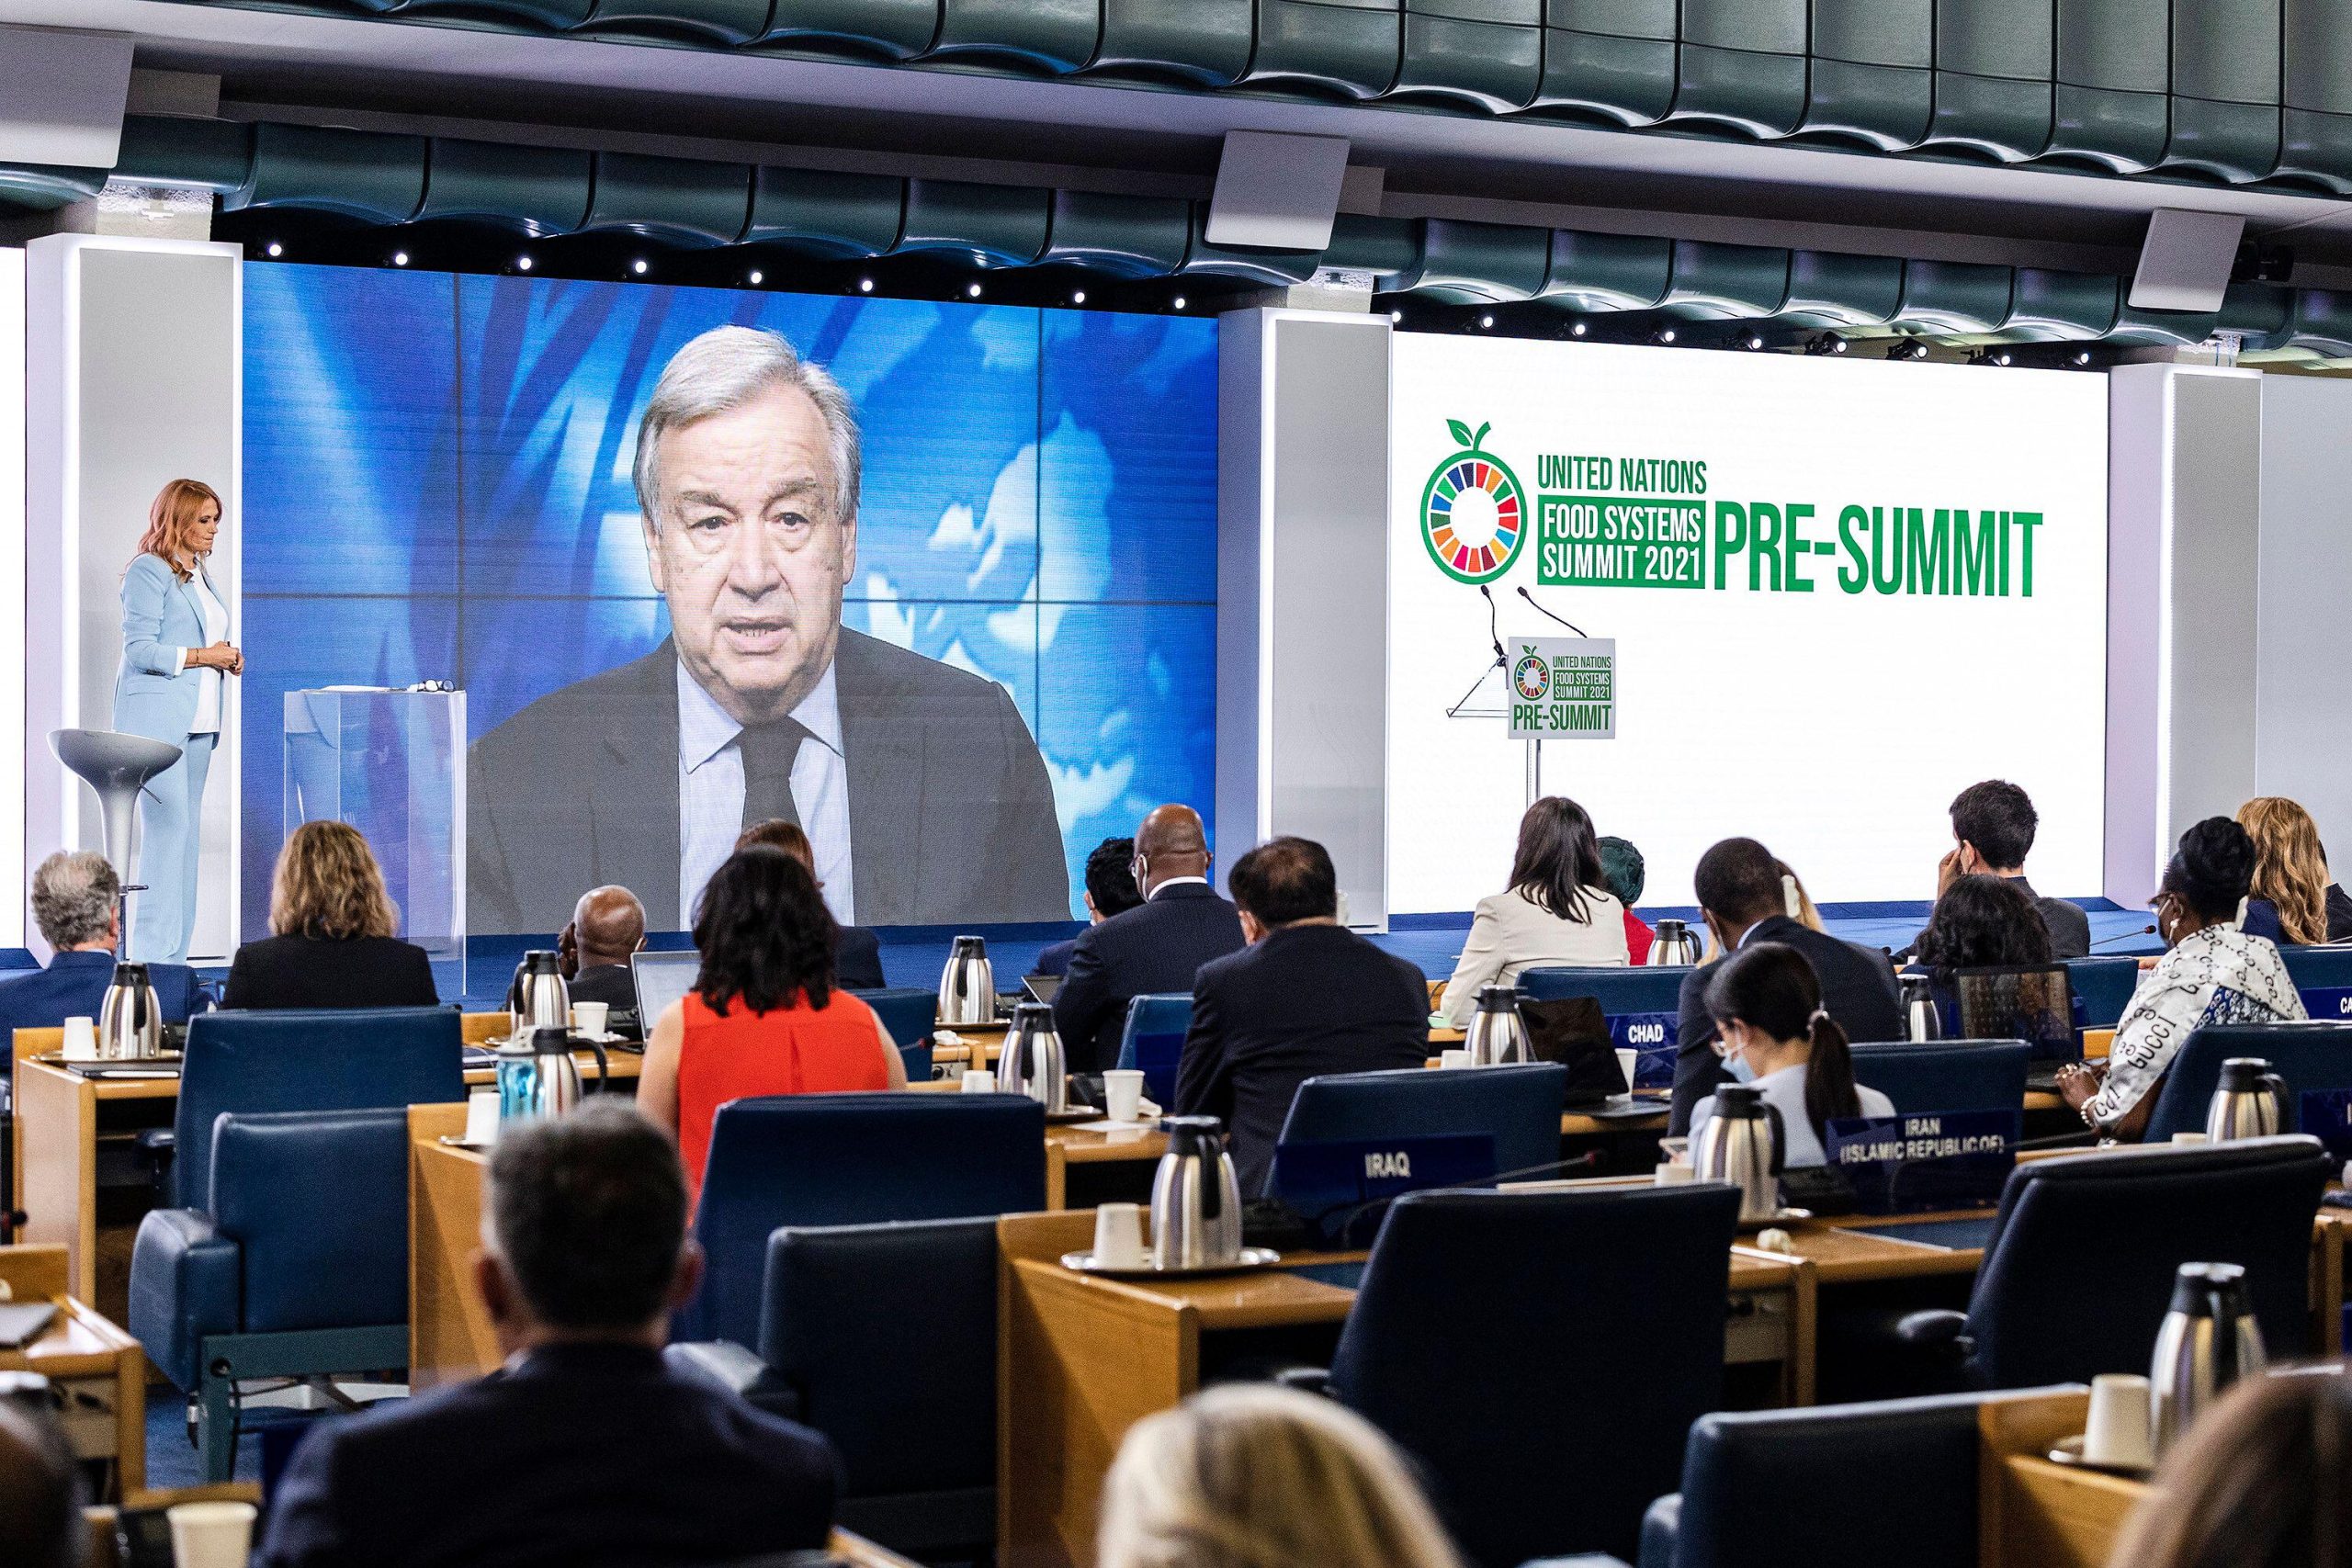 UN Secretary-General António Guterres addresses delegates at a pre-summit event for the recent Food Systems Summit